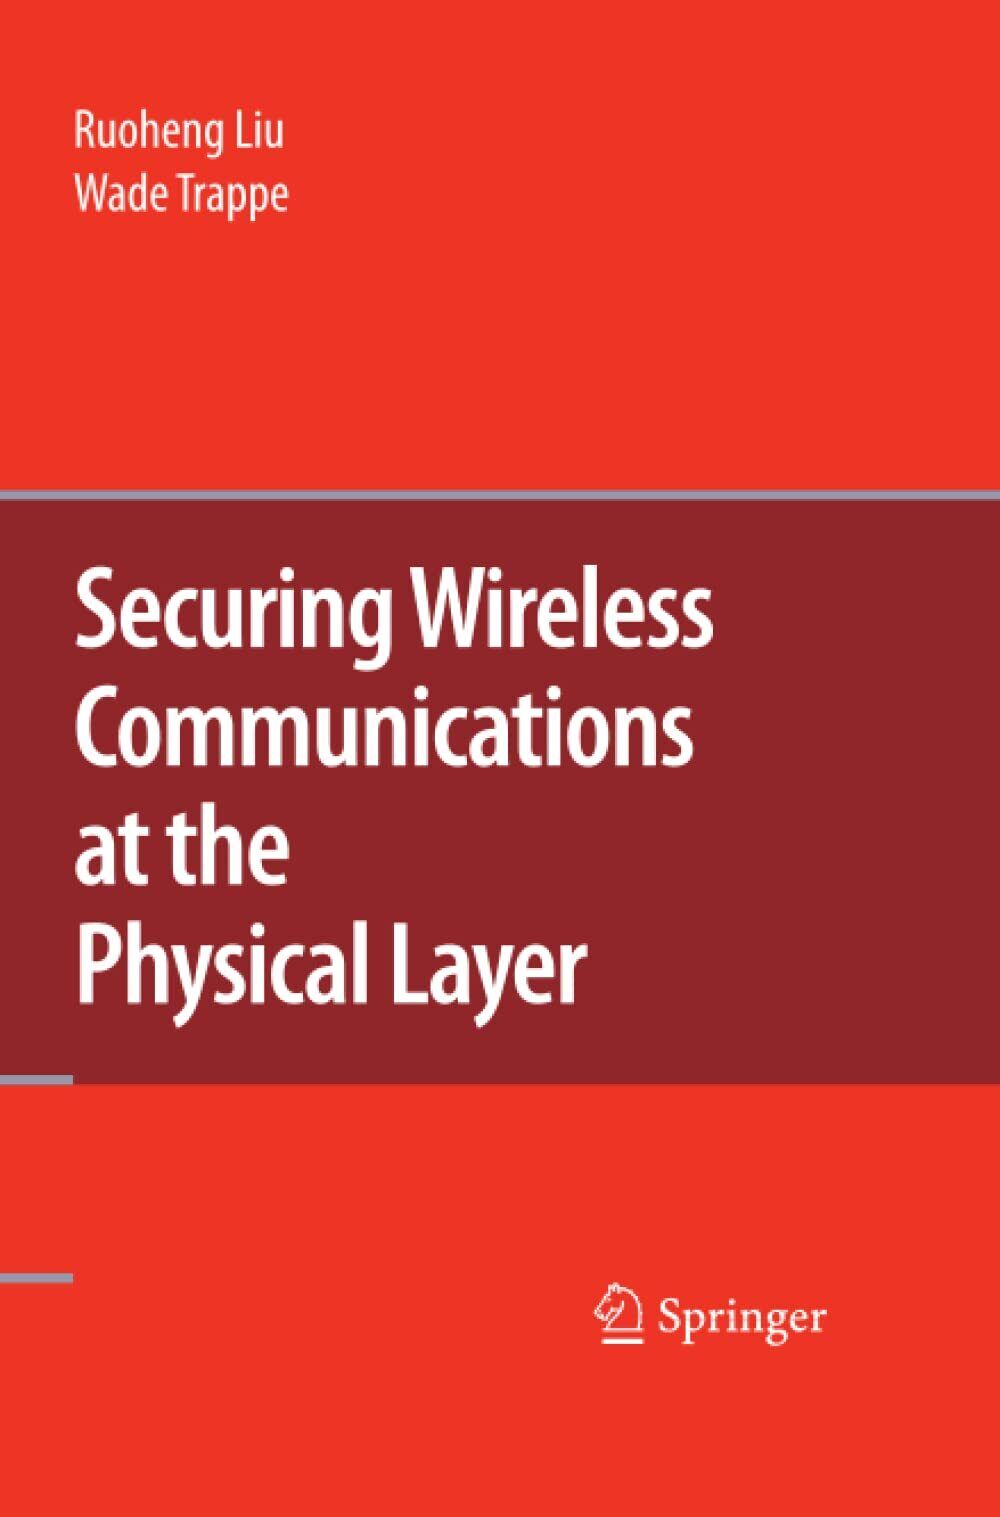 Securing Wireless Communications at the Physical Layer - Ruoheng Liu - 2014